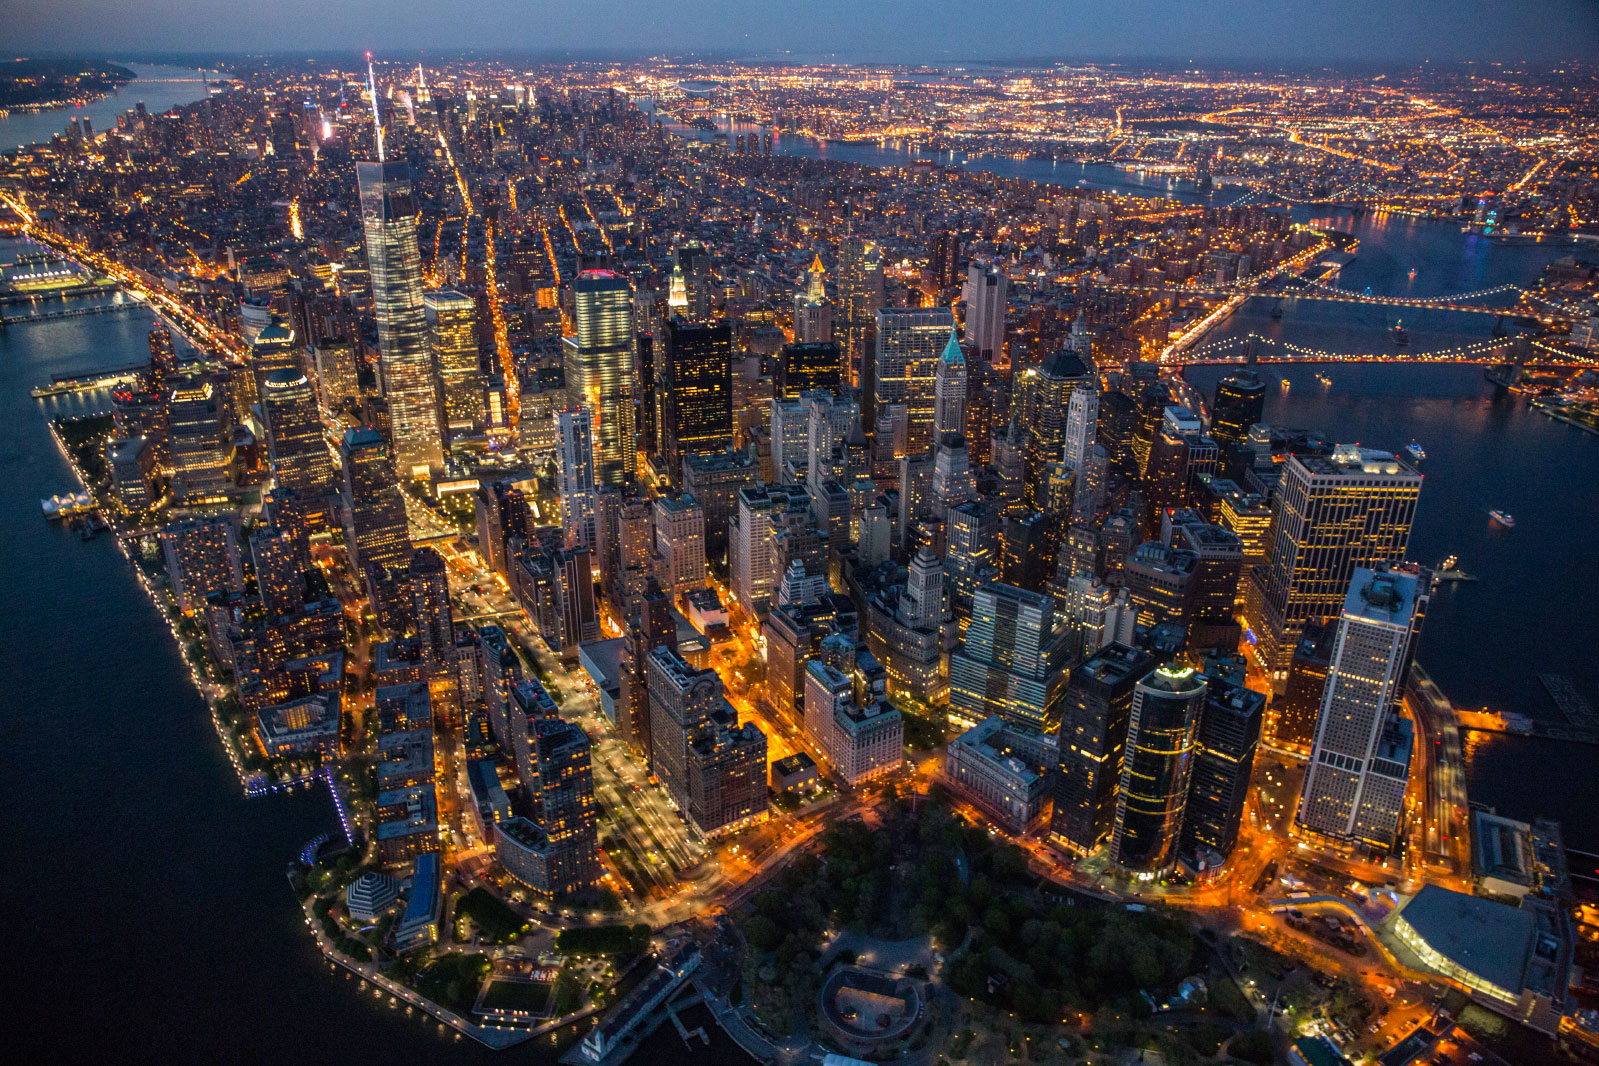 At twilight, Manhattan resembles a vast living organism with ribbons of energy pulsing through its streets and up into its hundred thousand buildings.